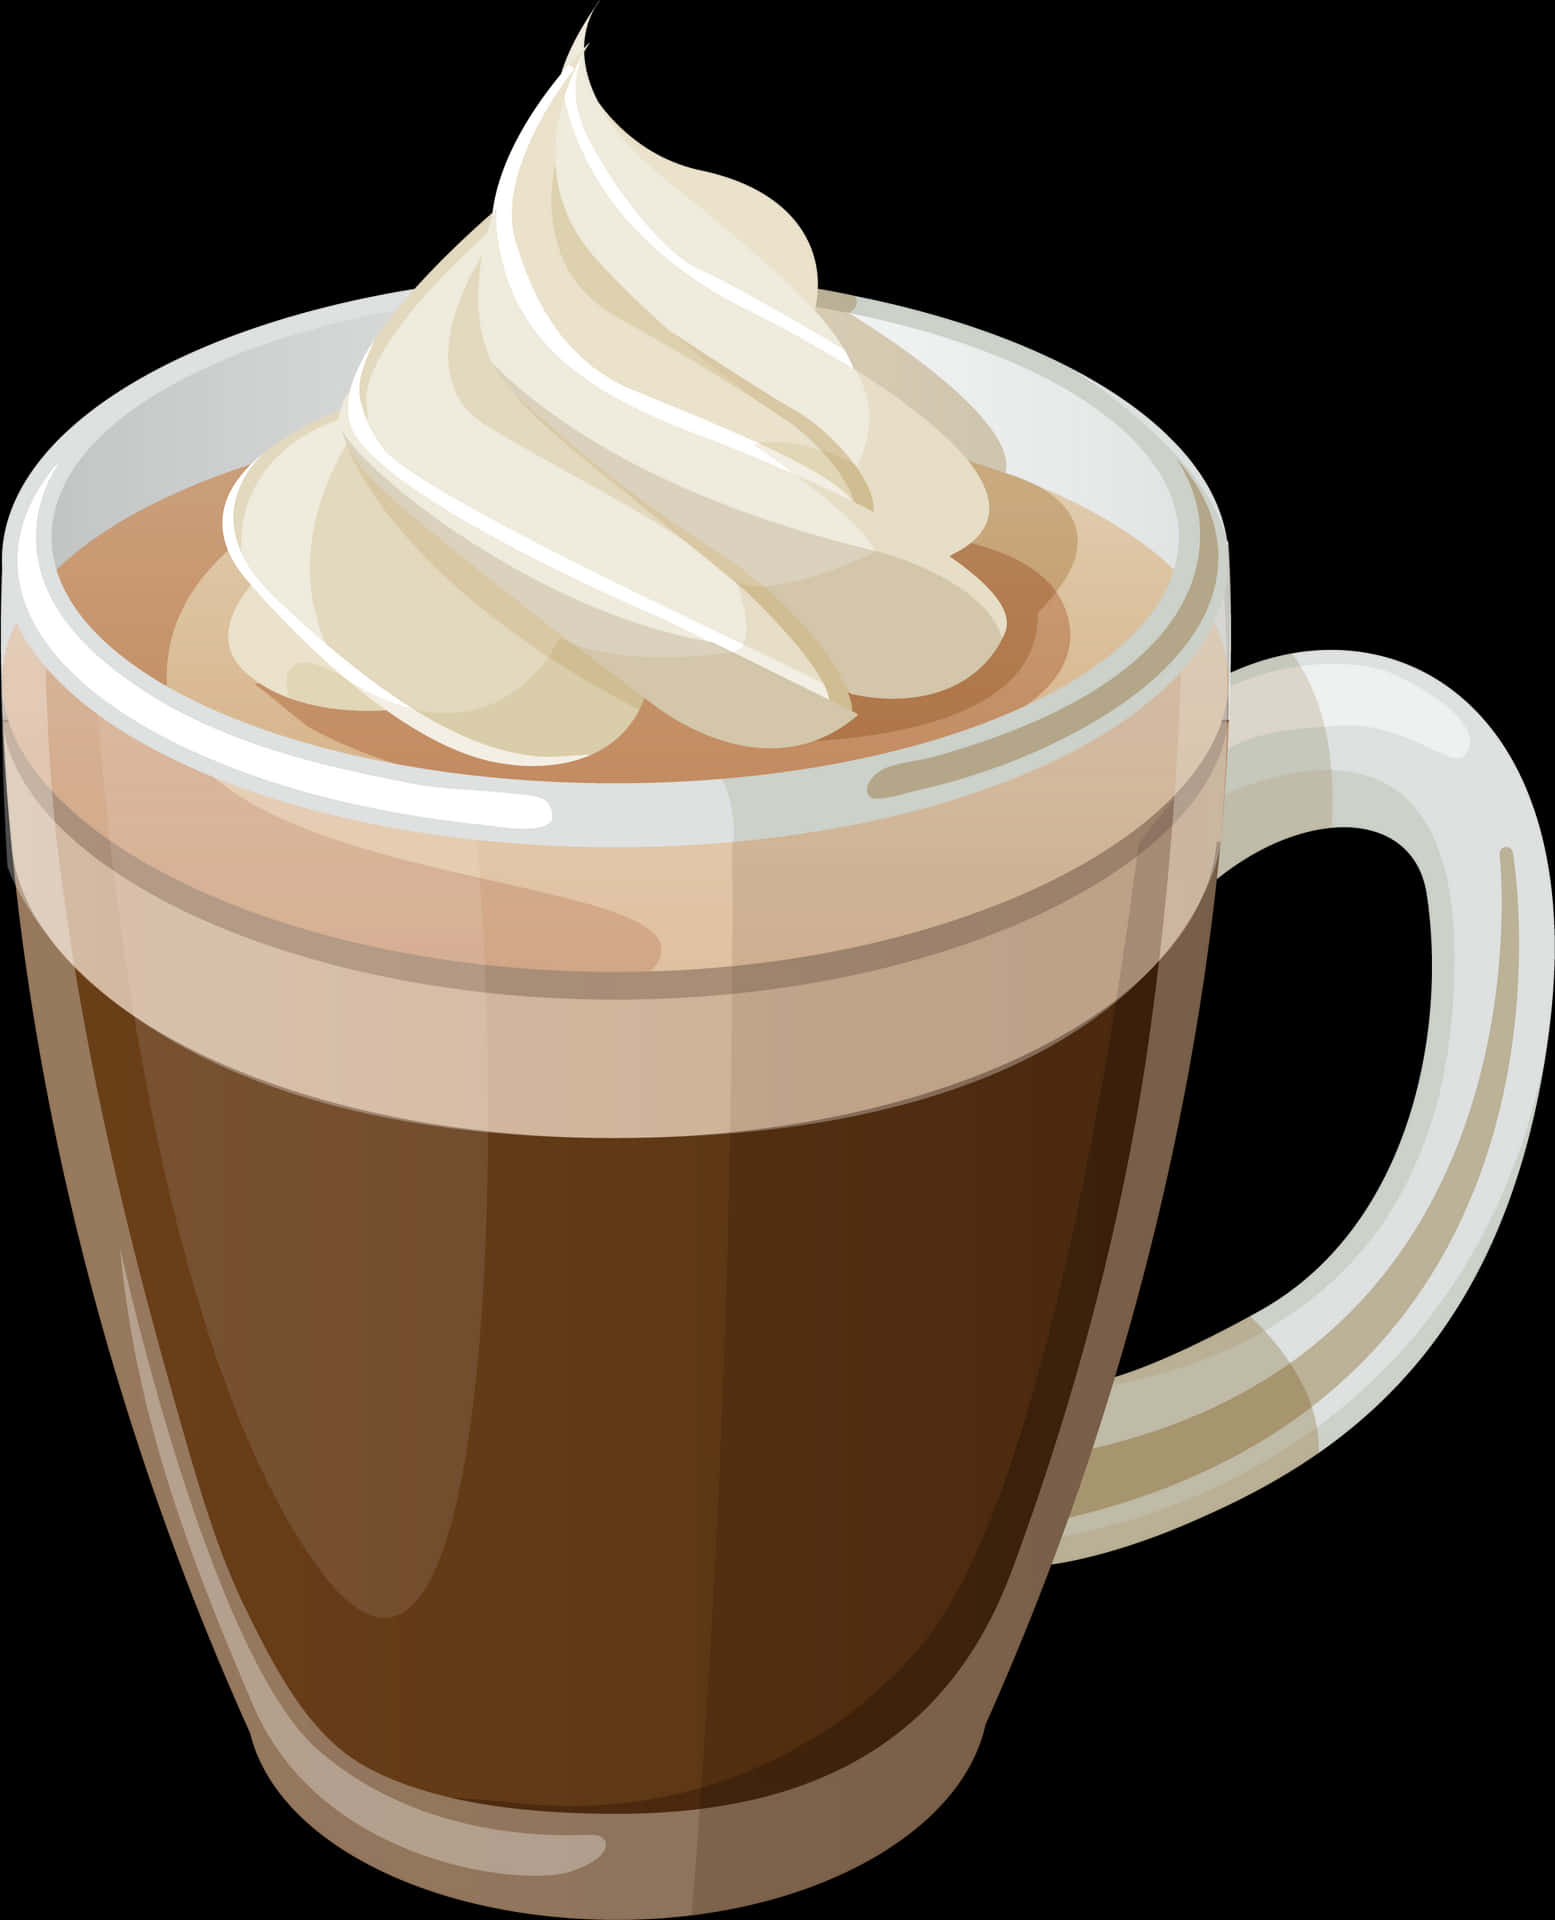 Whipped Cream Topped Coffee Illustration PNG